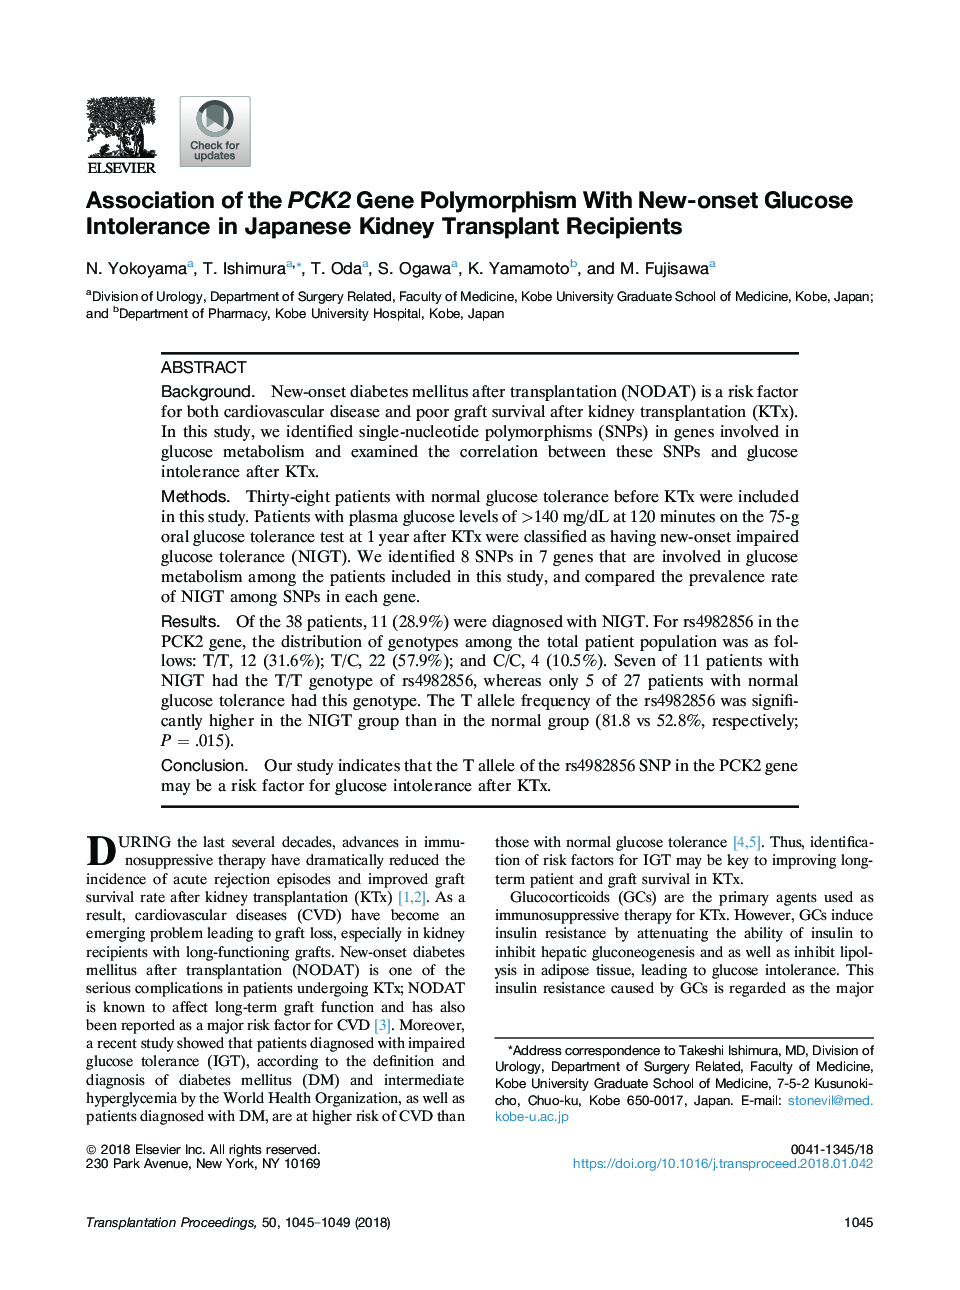 Association of the PCK2 Gene Polymorphism With New-onset Glucose Intolerance in Japanese Kidney Transplant Recipients